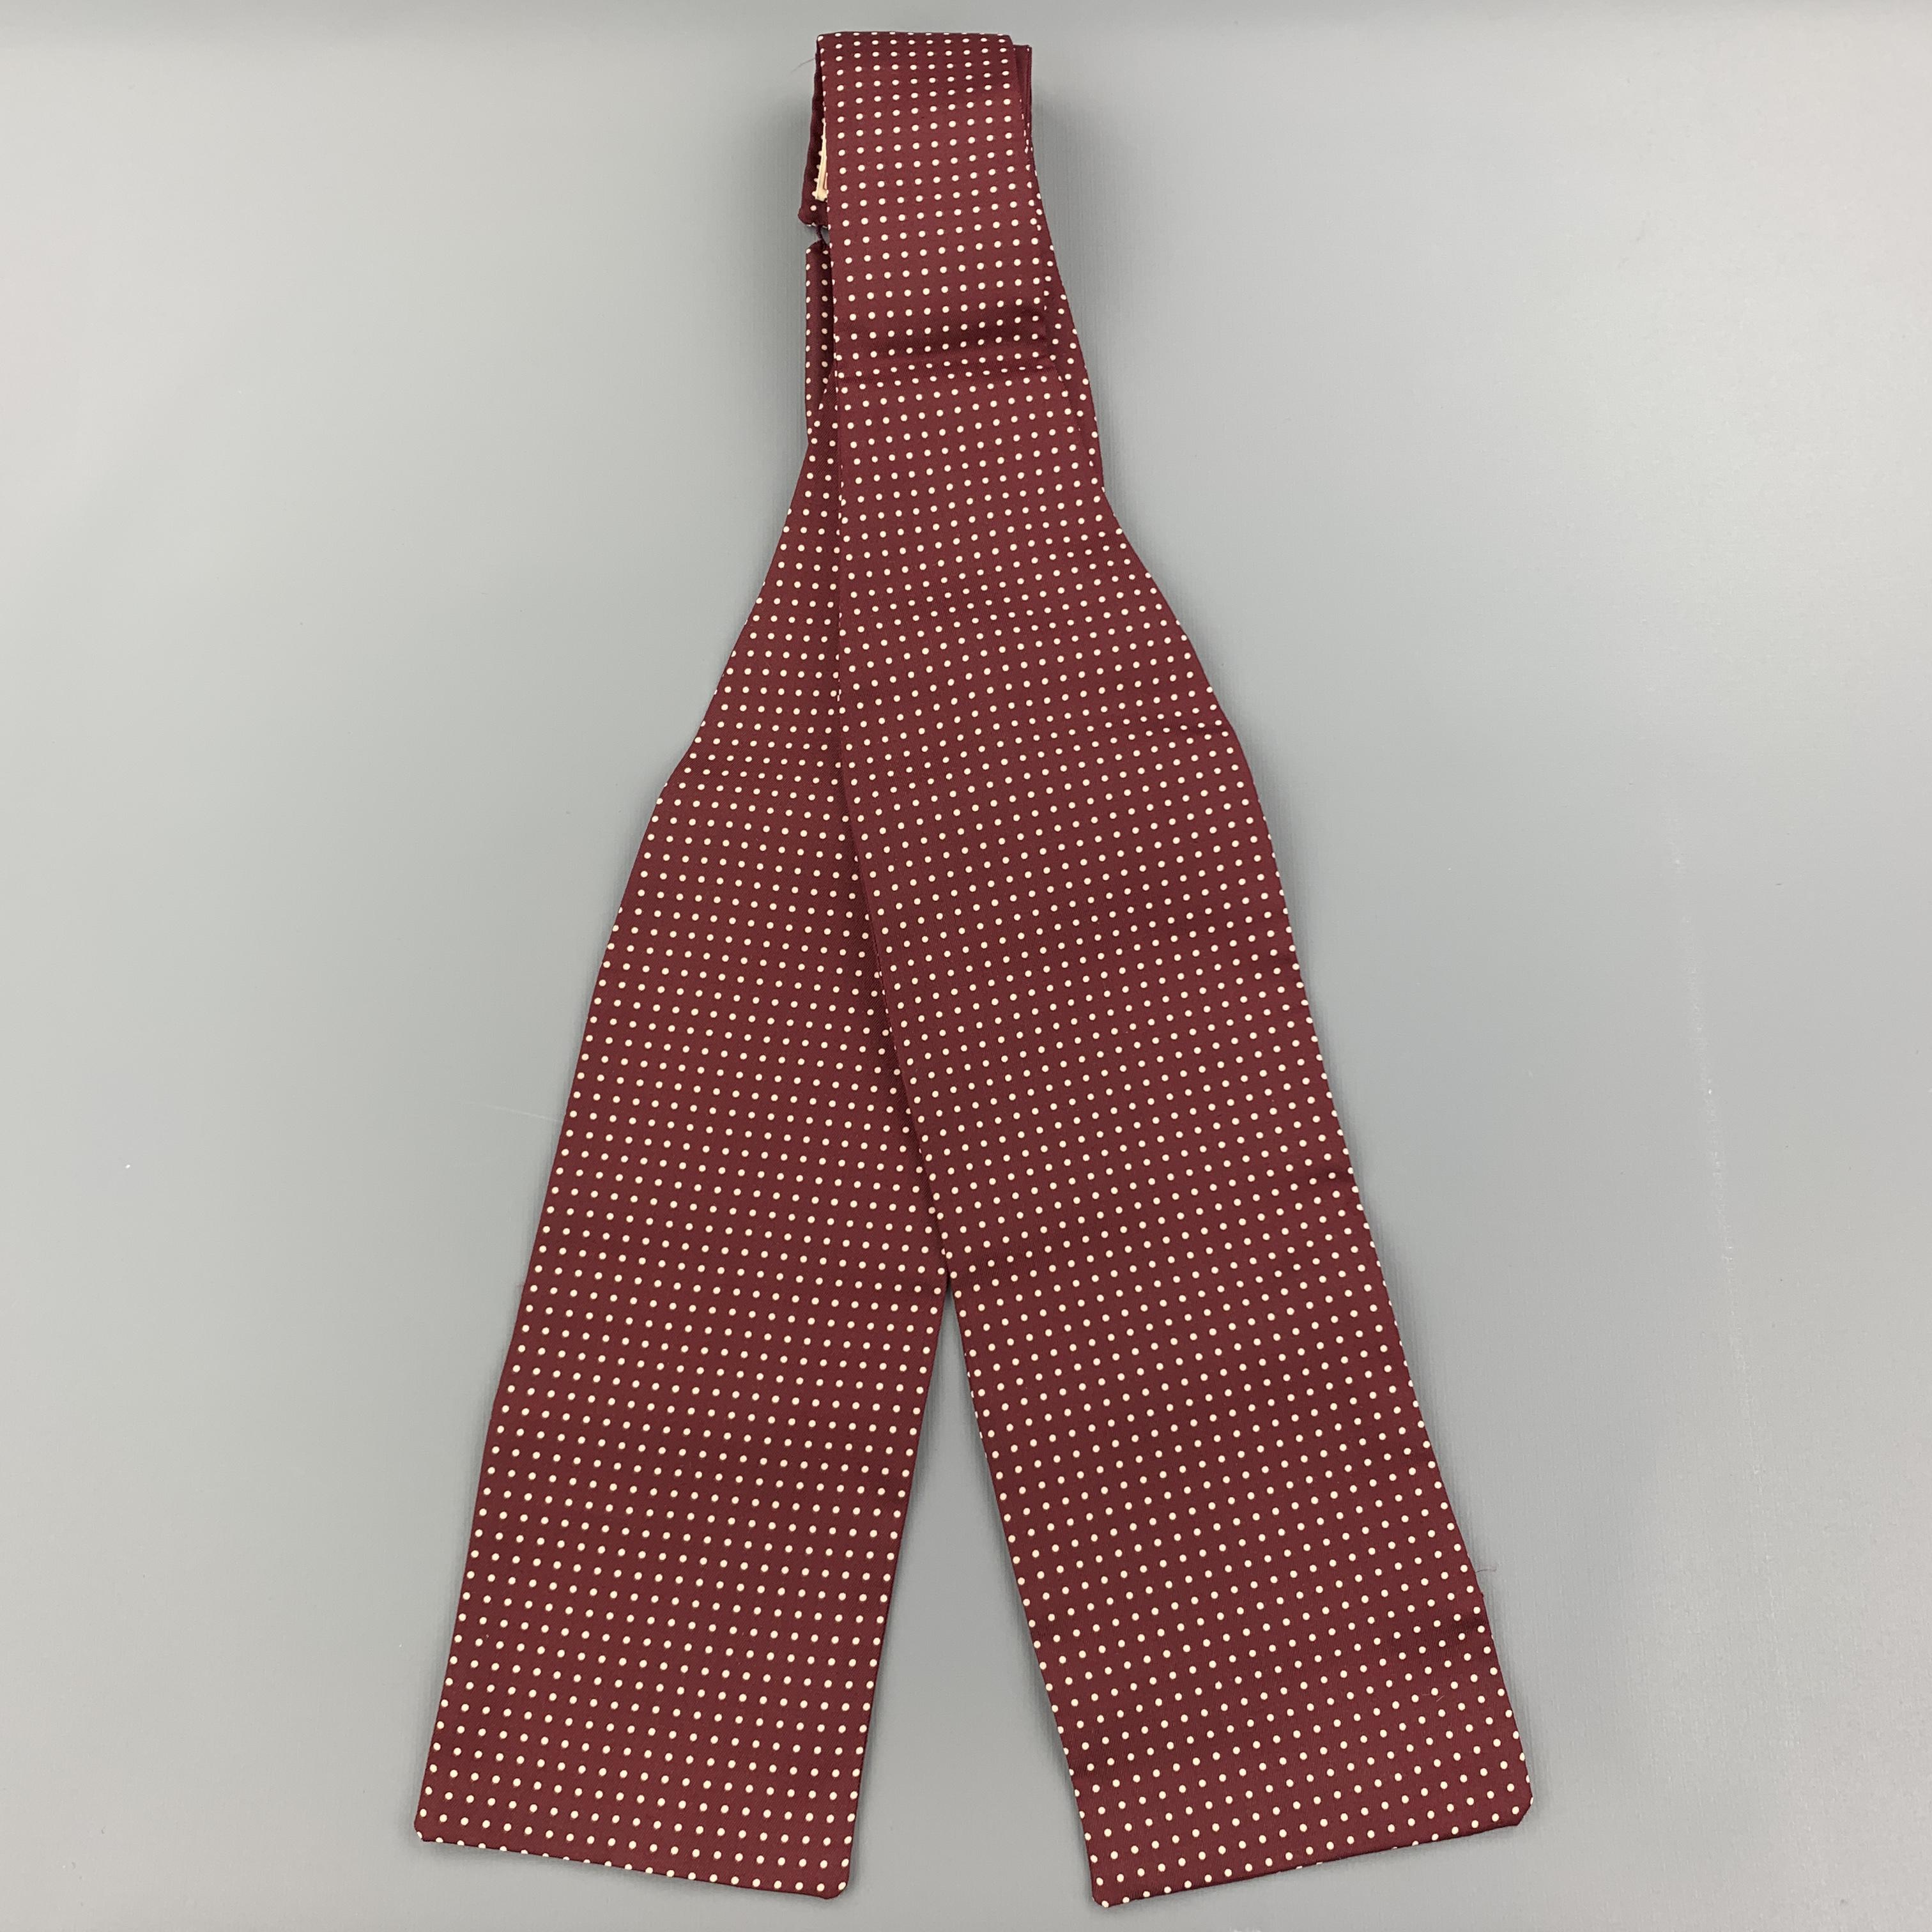 SWAINE ADENEY BRIGG ascot comes in a burgundy polka dot print silk. Made in England.

Excellent Pre-Owned Condition.

Measurements:

Shortest Width: 2.5 in. 
Longest Width: 4 in. 
Length: 63 in.

 